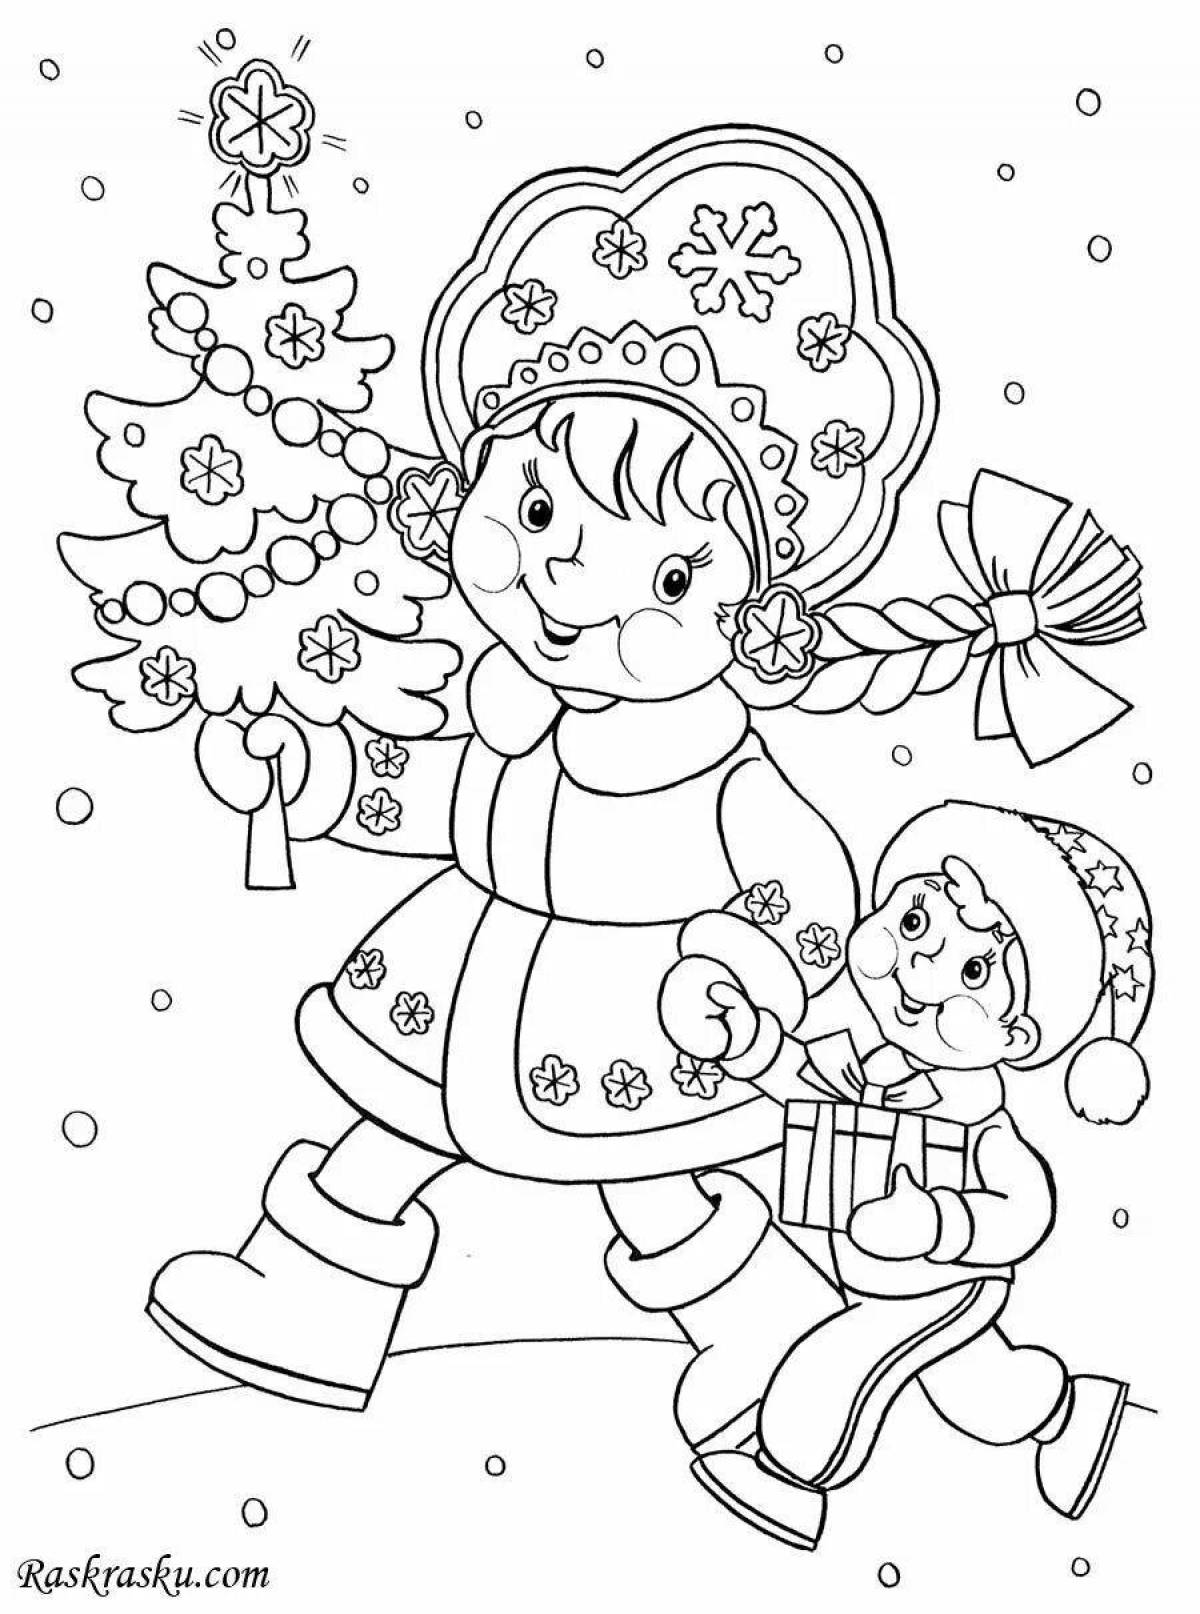 Coloring page glamor snow maiden